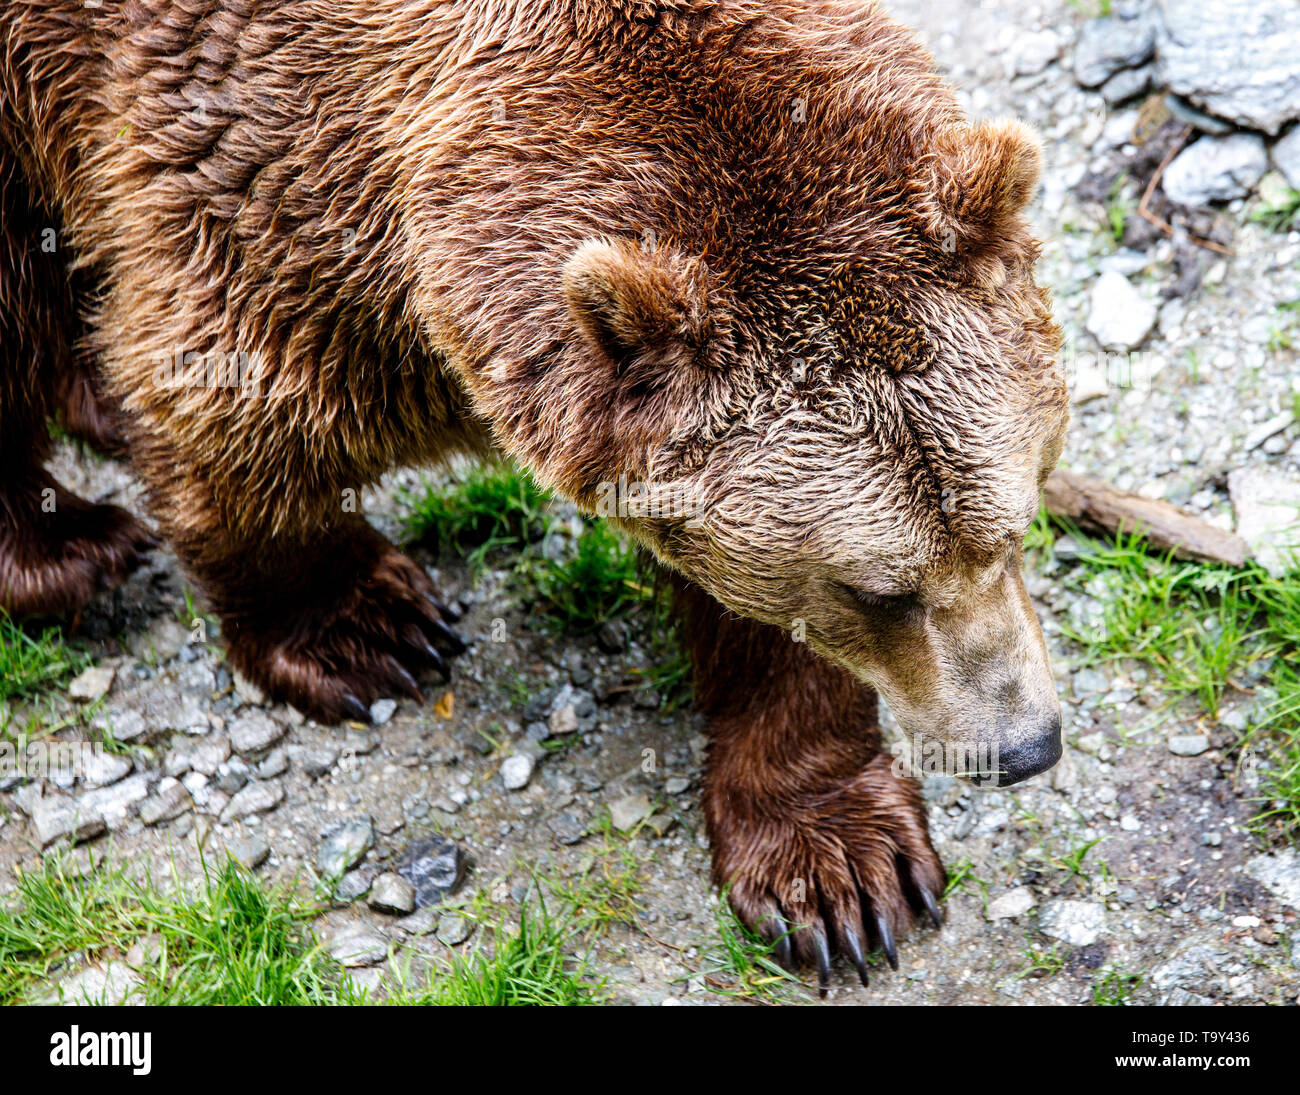 huge big brown bear in its territory in the nature park observing Stock Photo